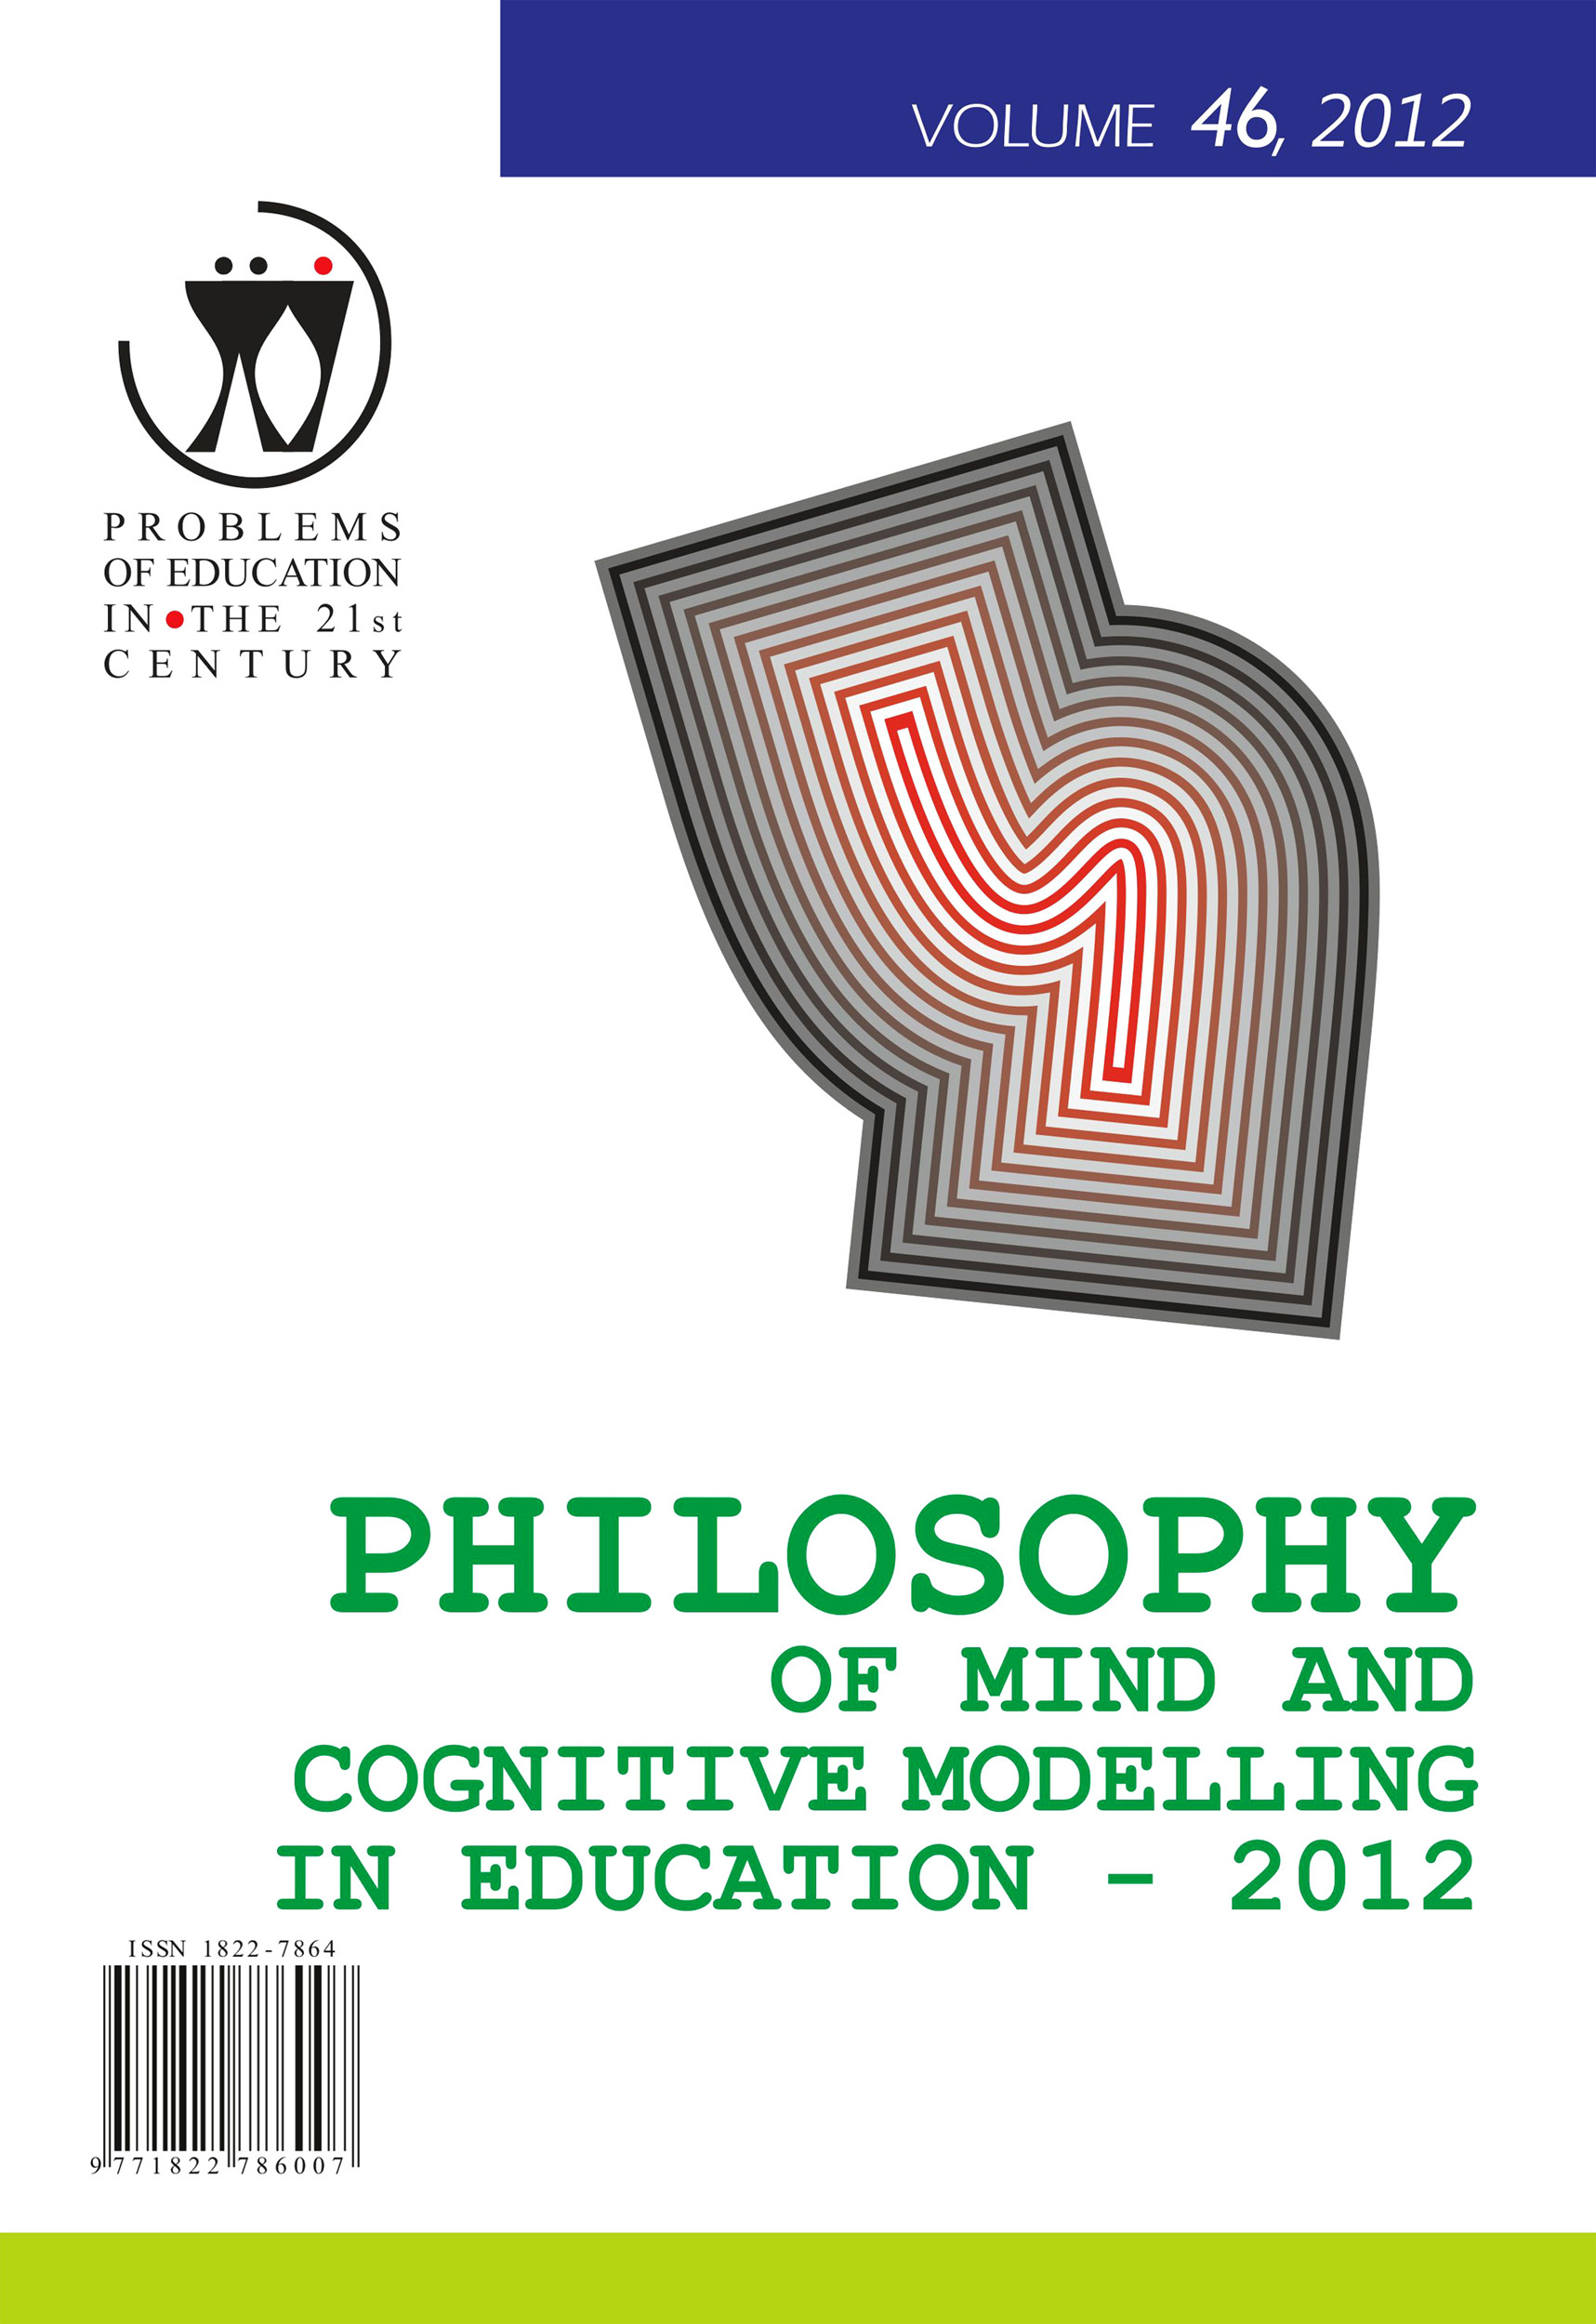 PHILOSOPHY OF MIND AND COGNITIVE MODELLING IN EDUCATION Cover Image